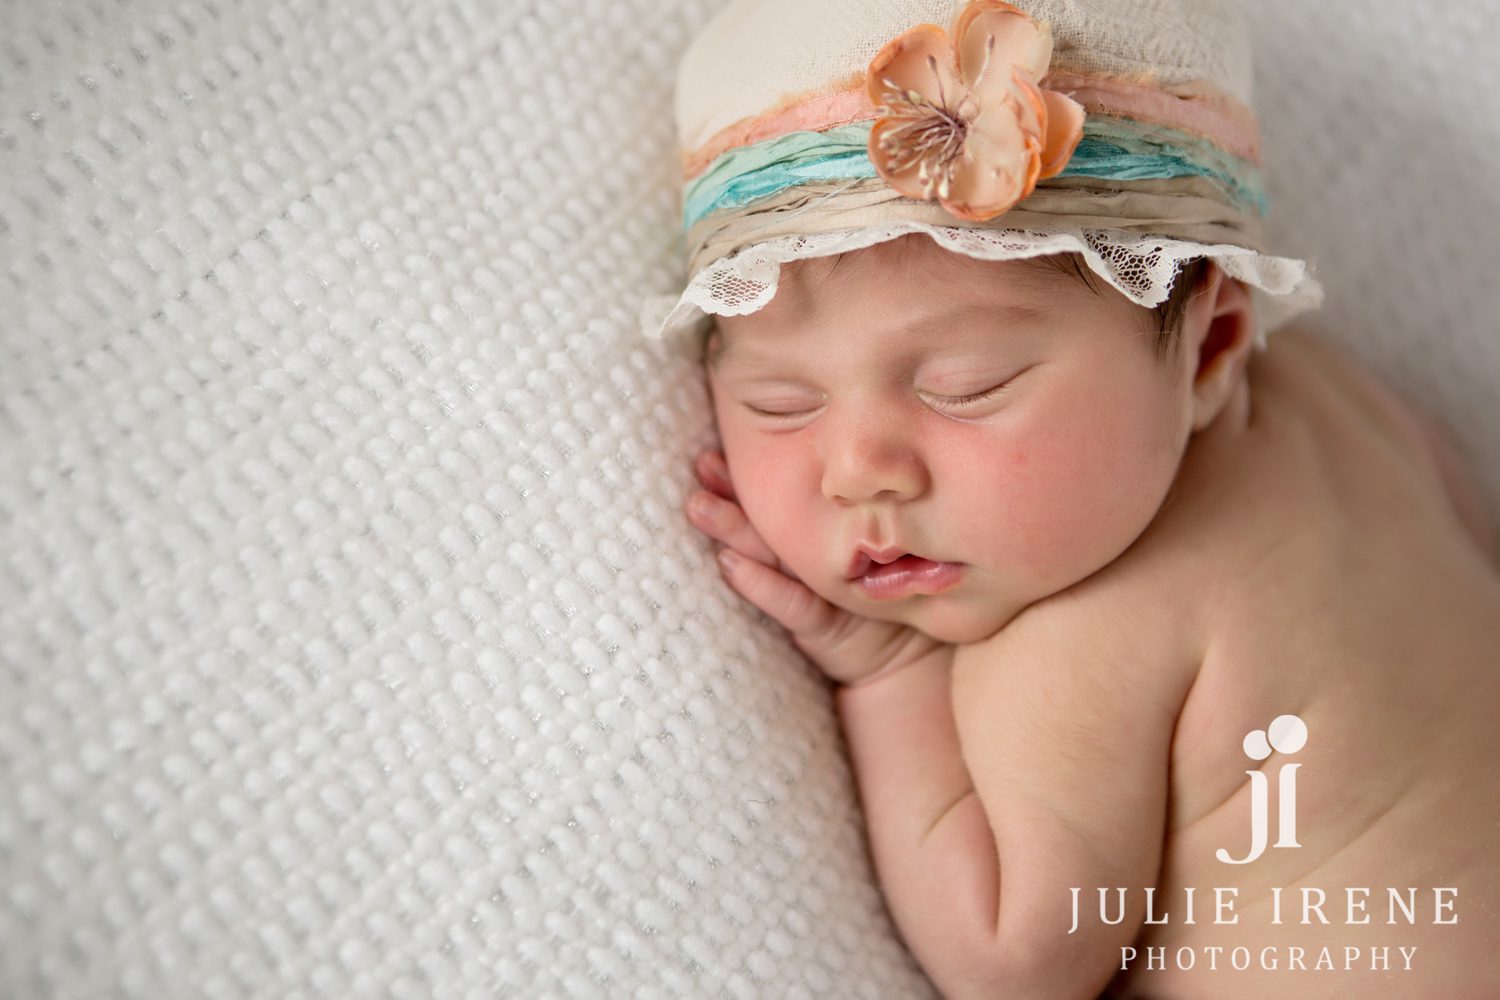 Sleeping baby with hat